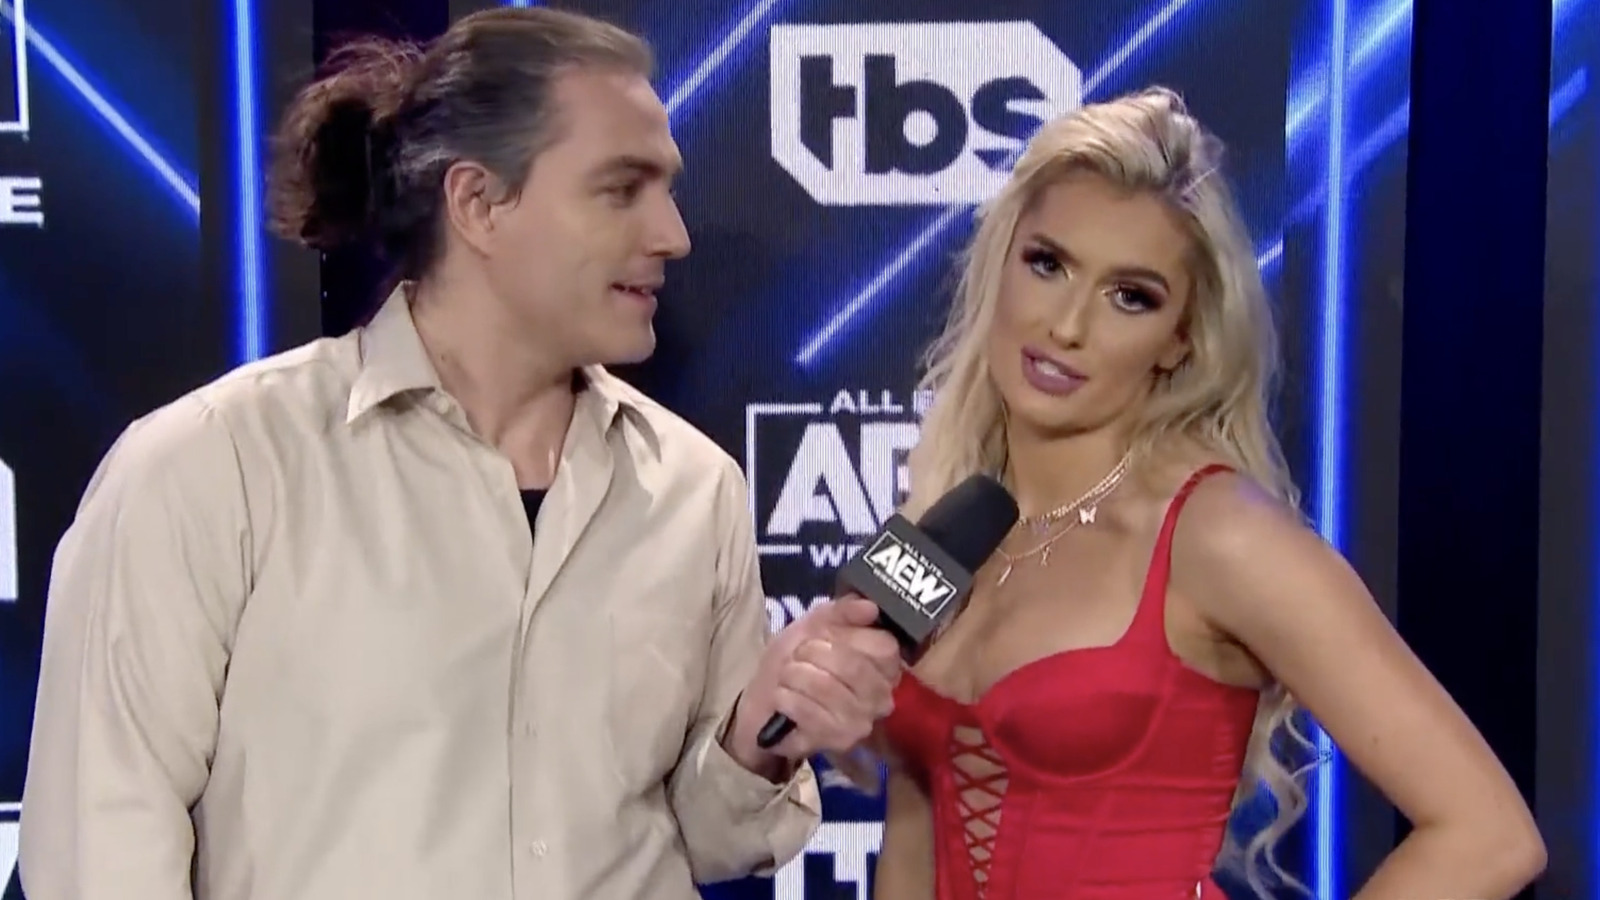 Mariah May Is All Elite, Debuts In Backstage Segment On AEW Dynamite